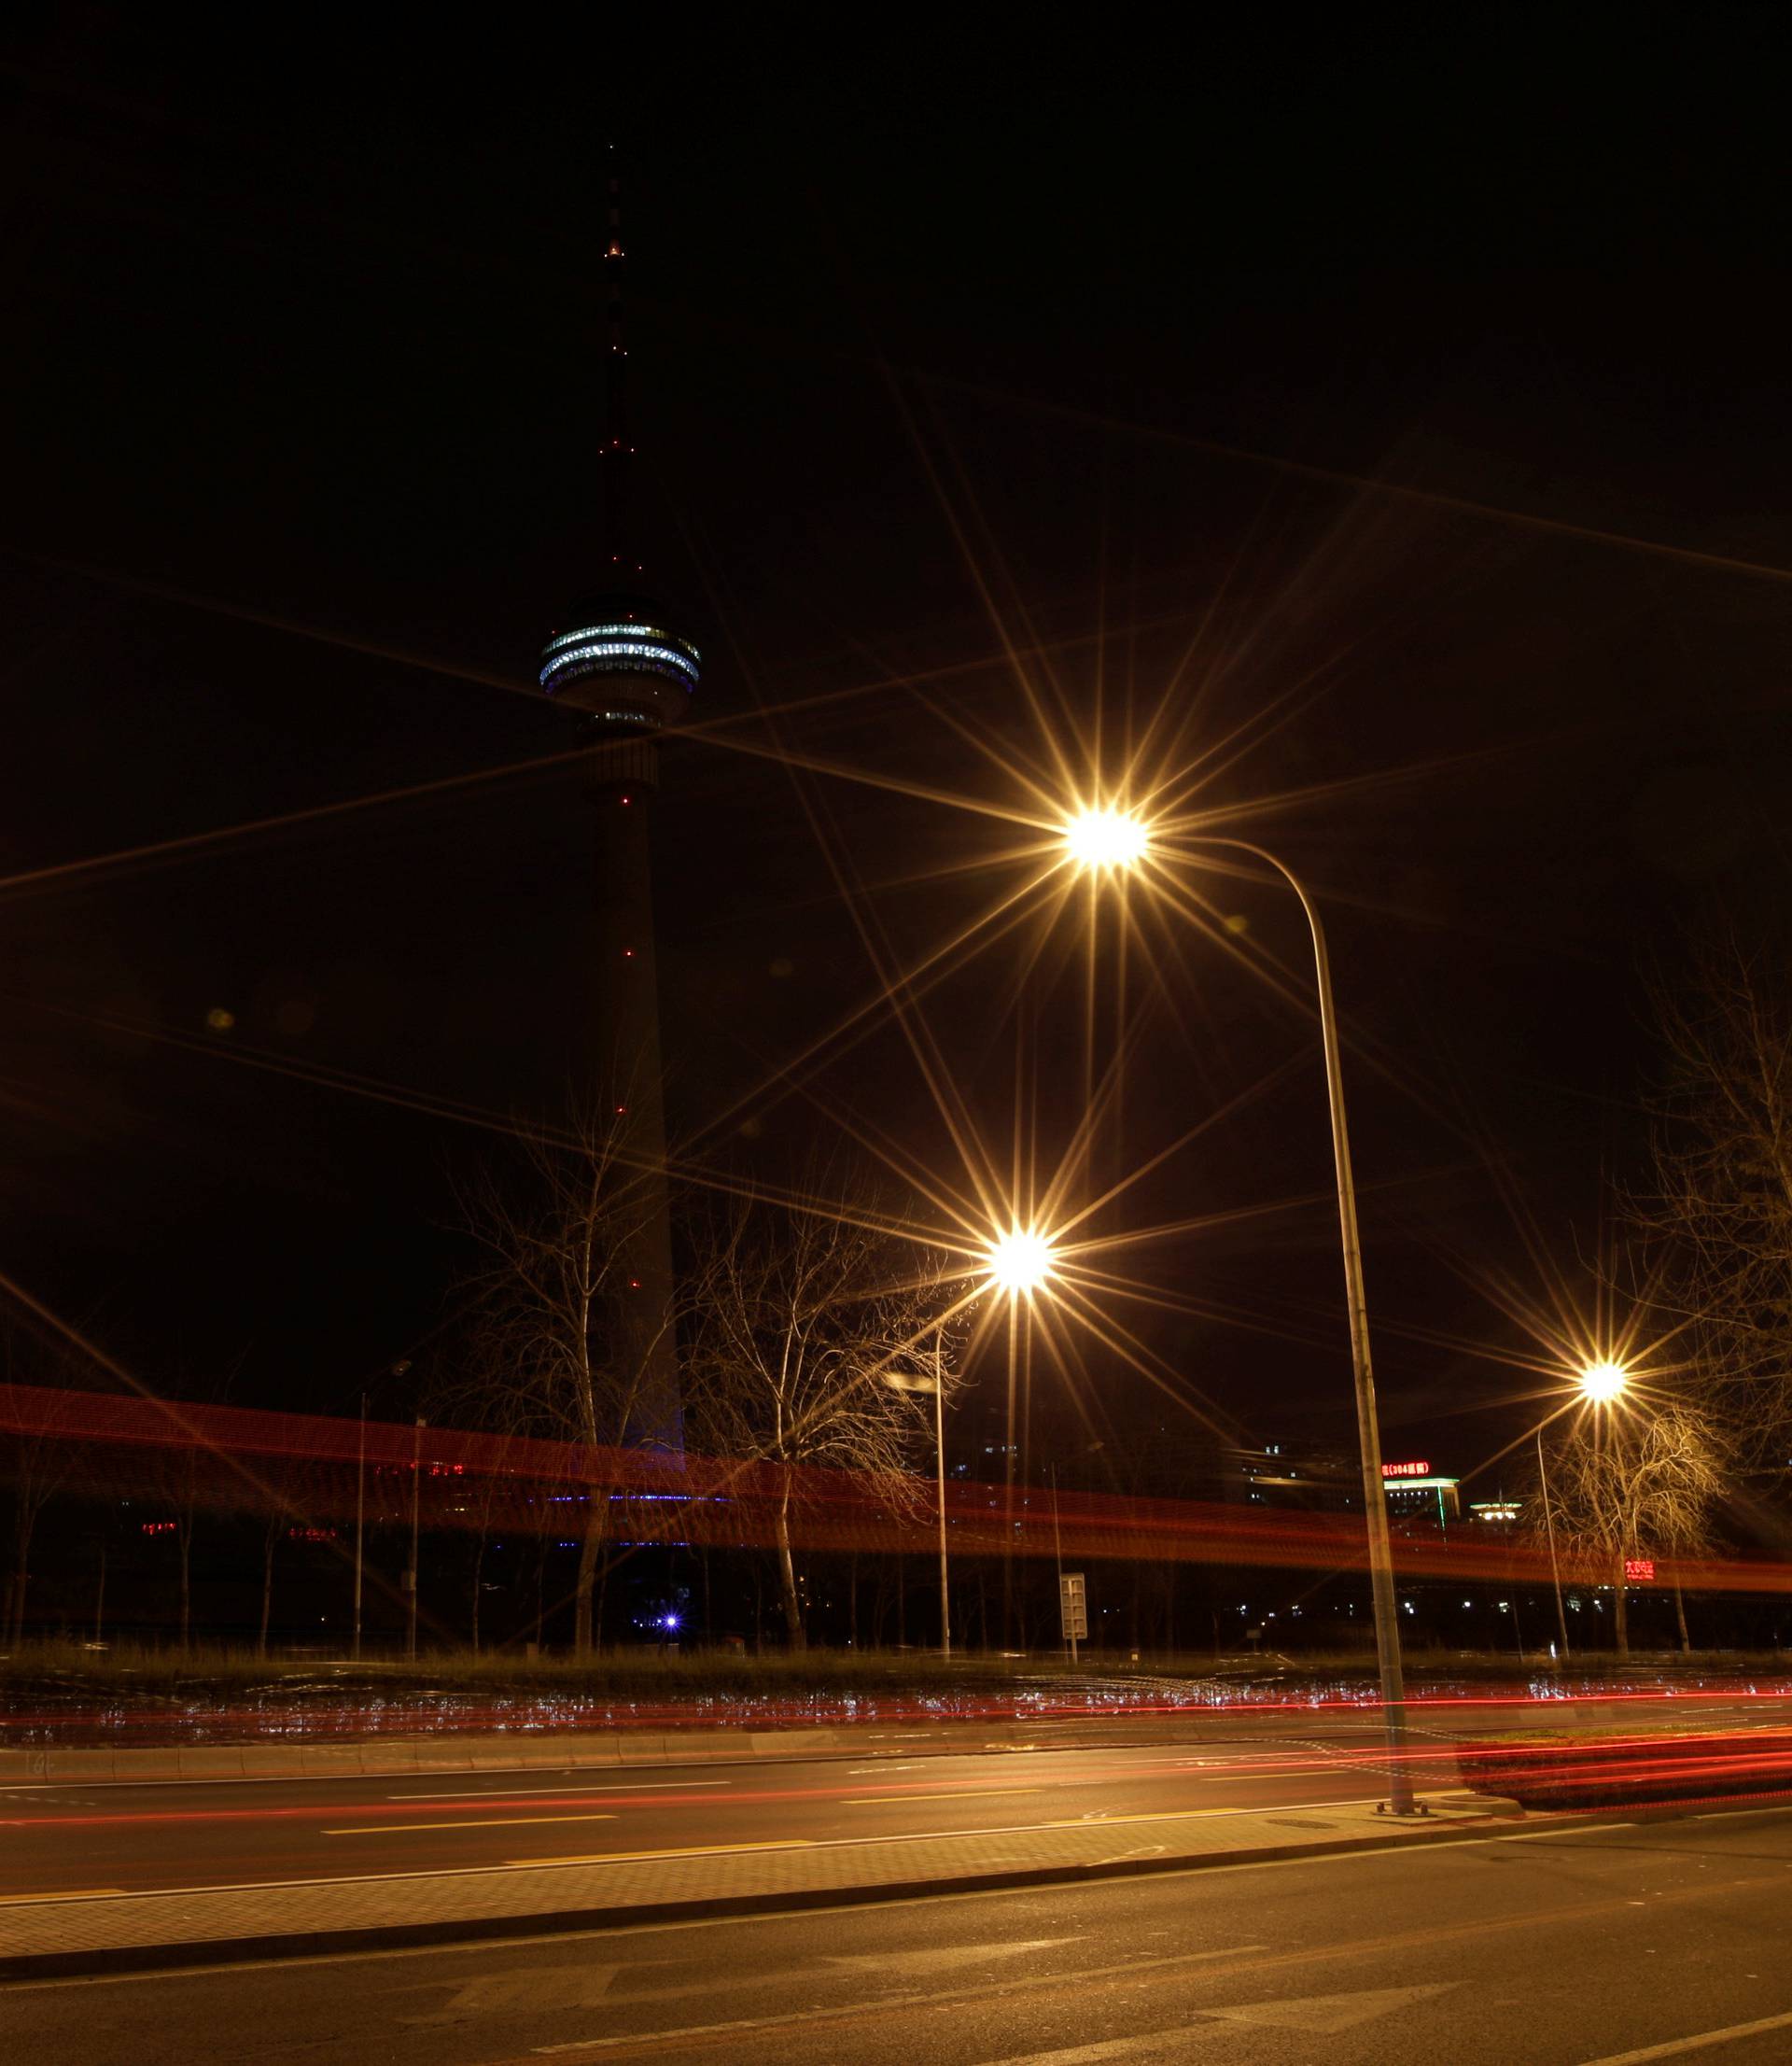 A view of China Central Radio and Television Tower during Earth Hour in Beijing